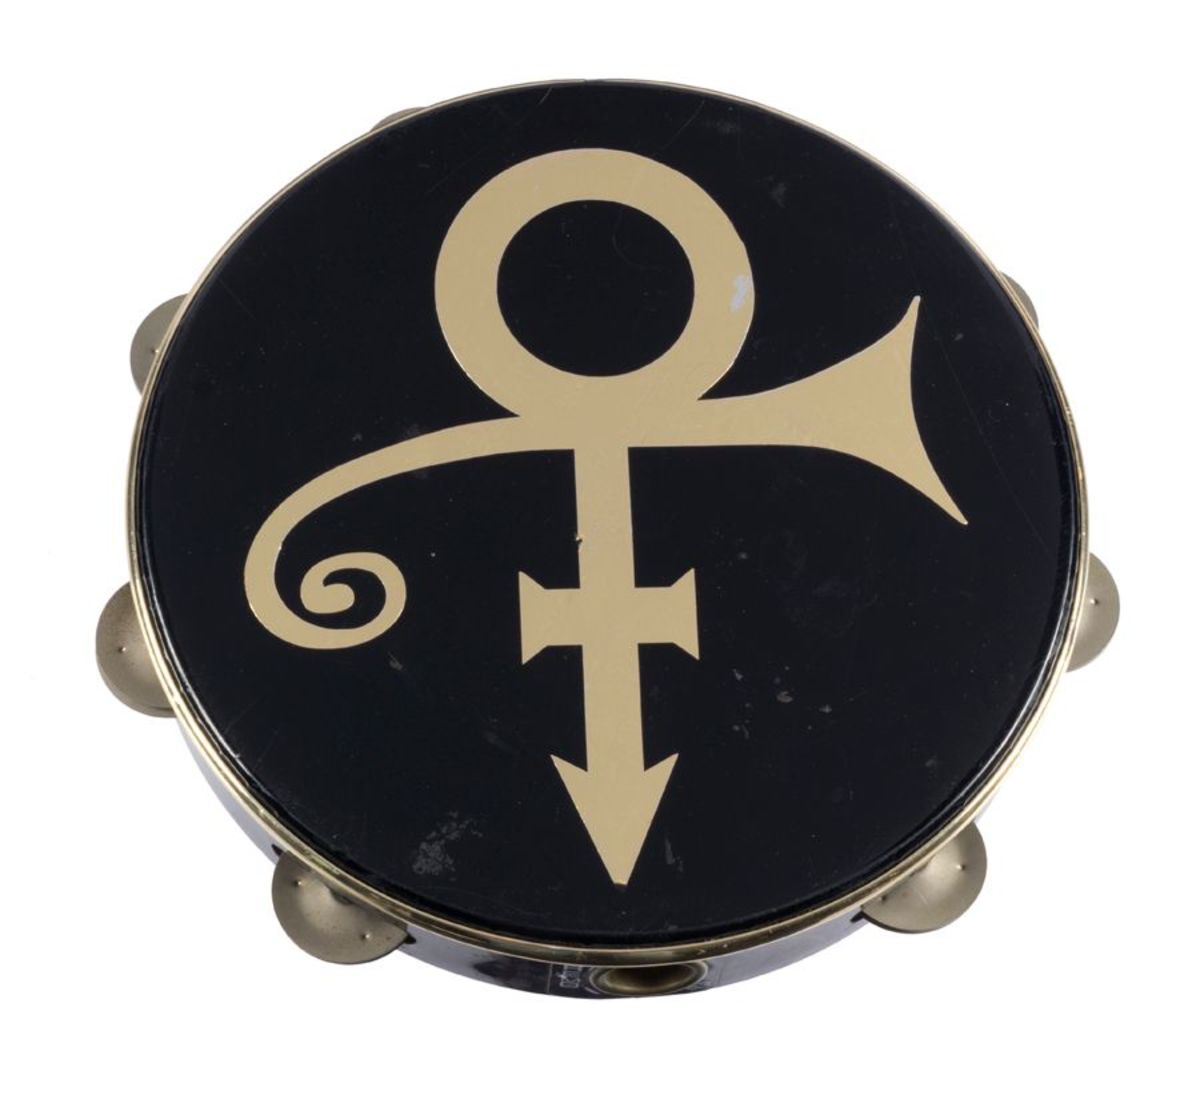 A black Remo tambourine used on stage by Prince in the 1990s.